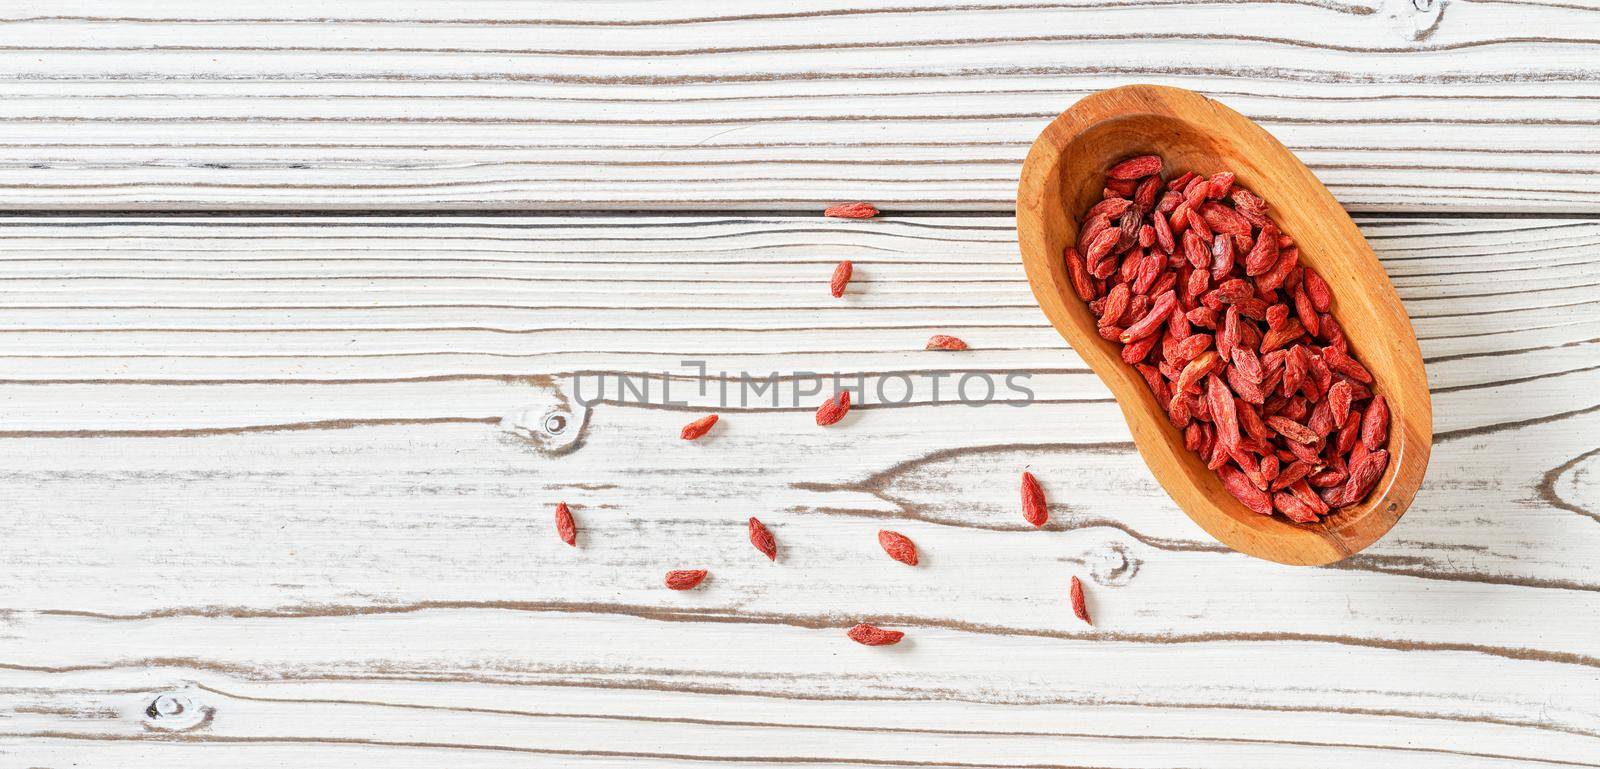 Dried goji aka. wolfberry seeds in wooden bowl and spilled on white boards desk near, view from above